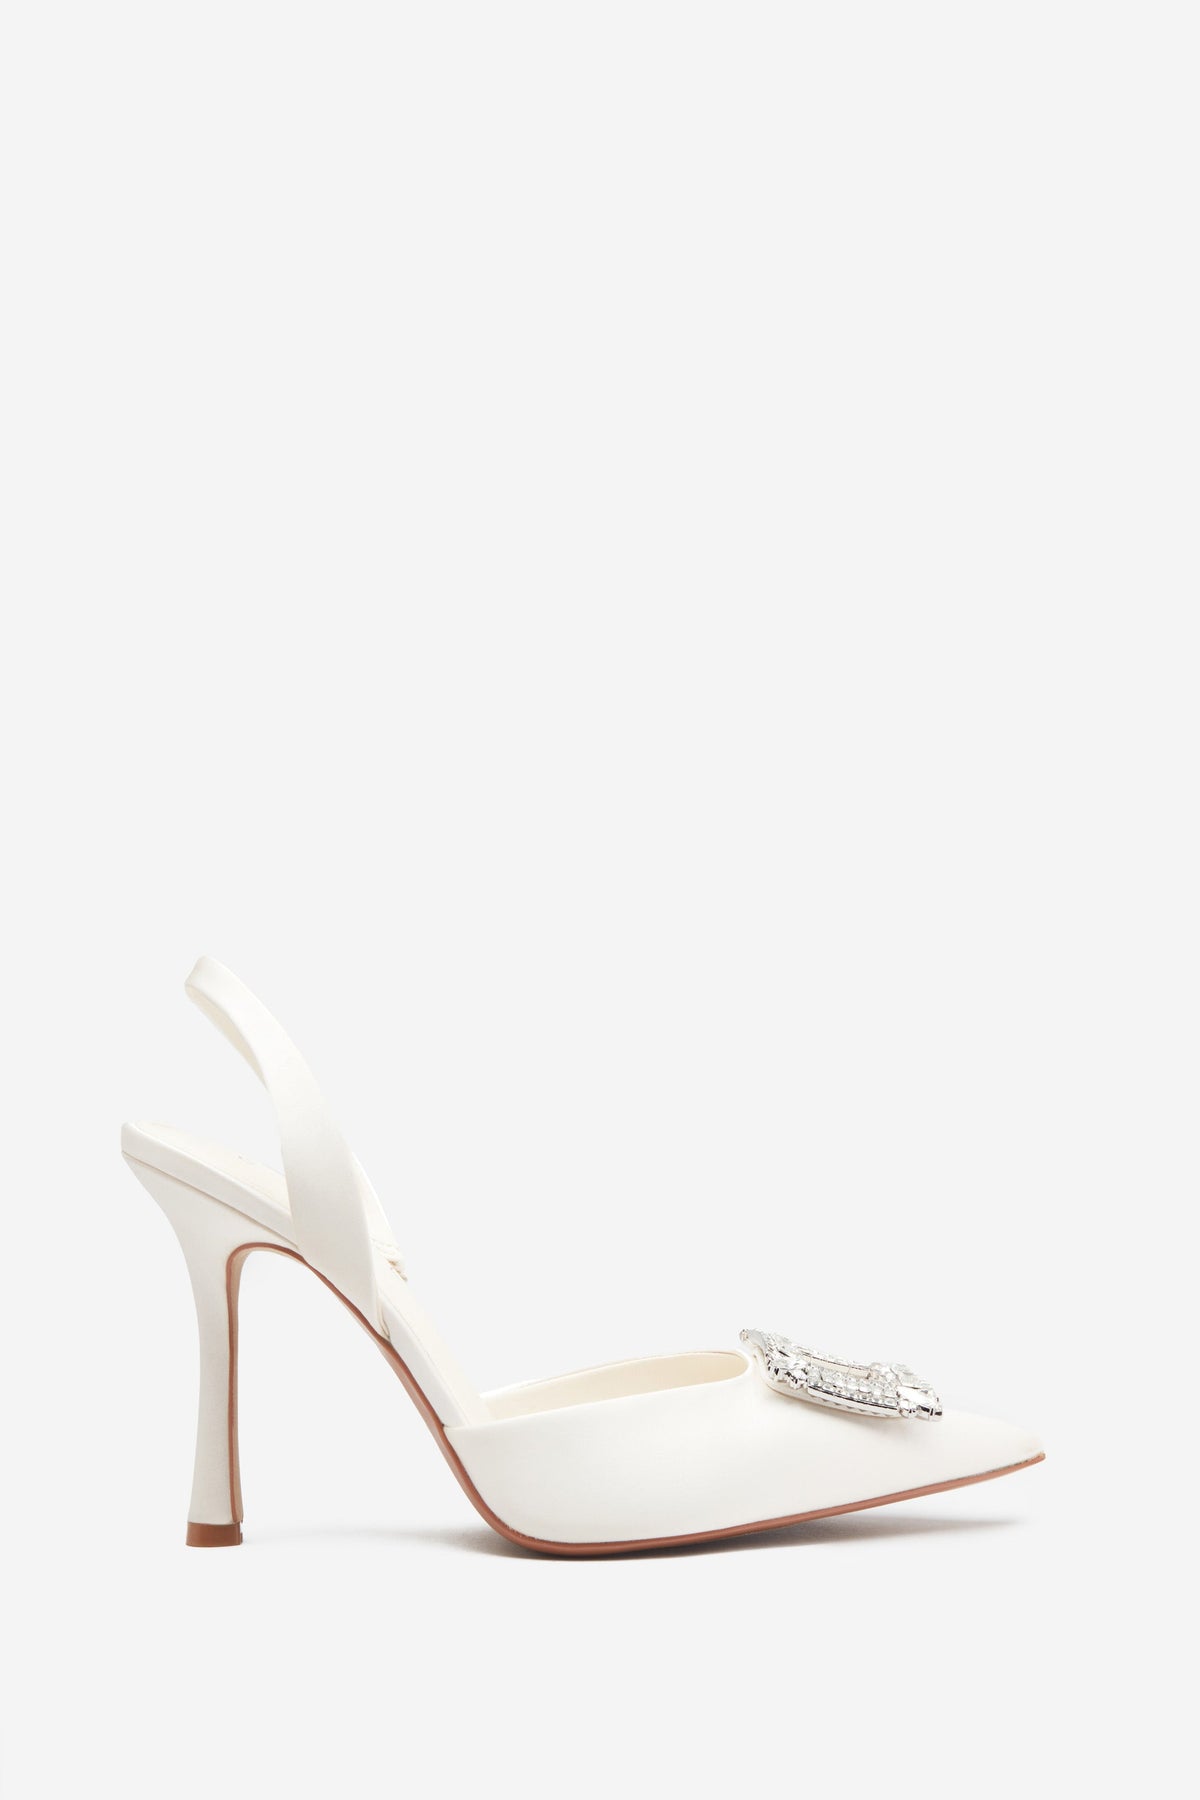 Just A Fling Ivory Satin Sling Back Heels With Diamante Brooches – Club L  London - USA